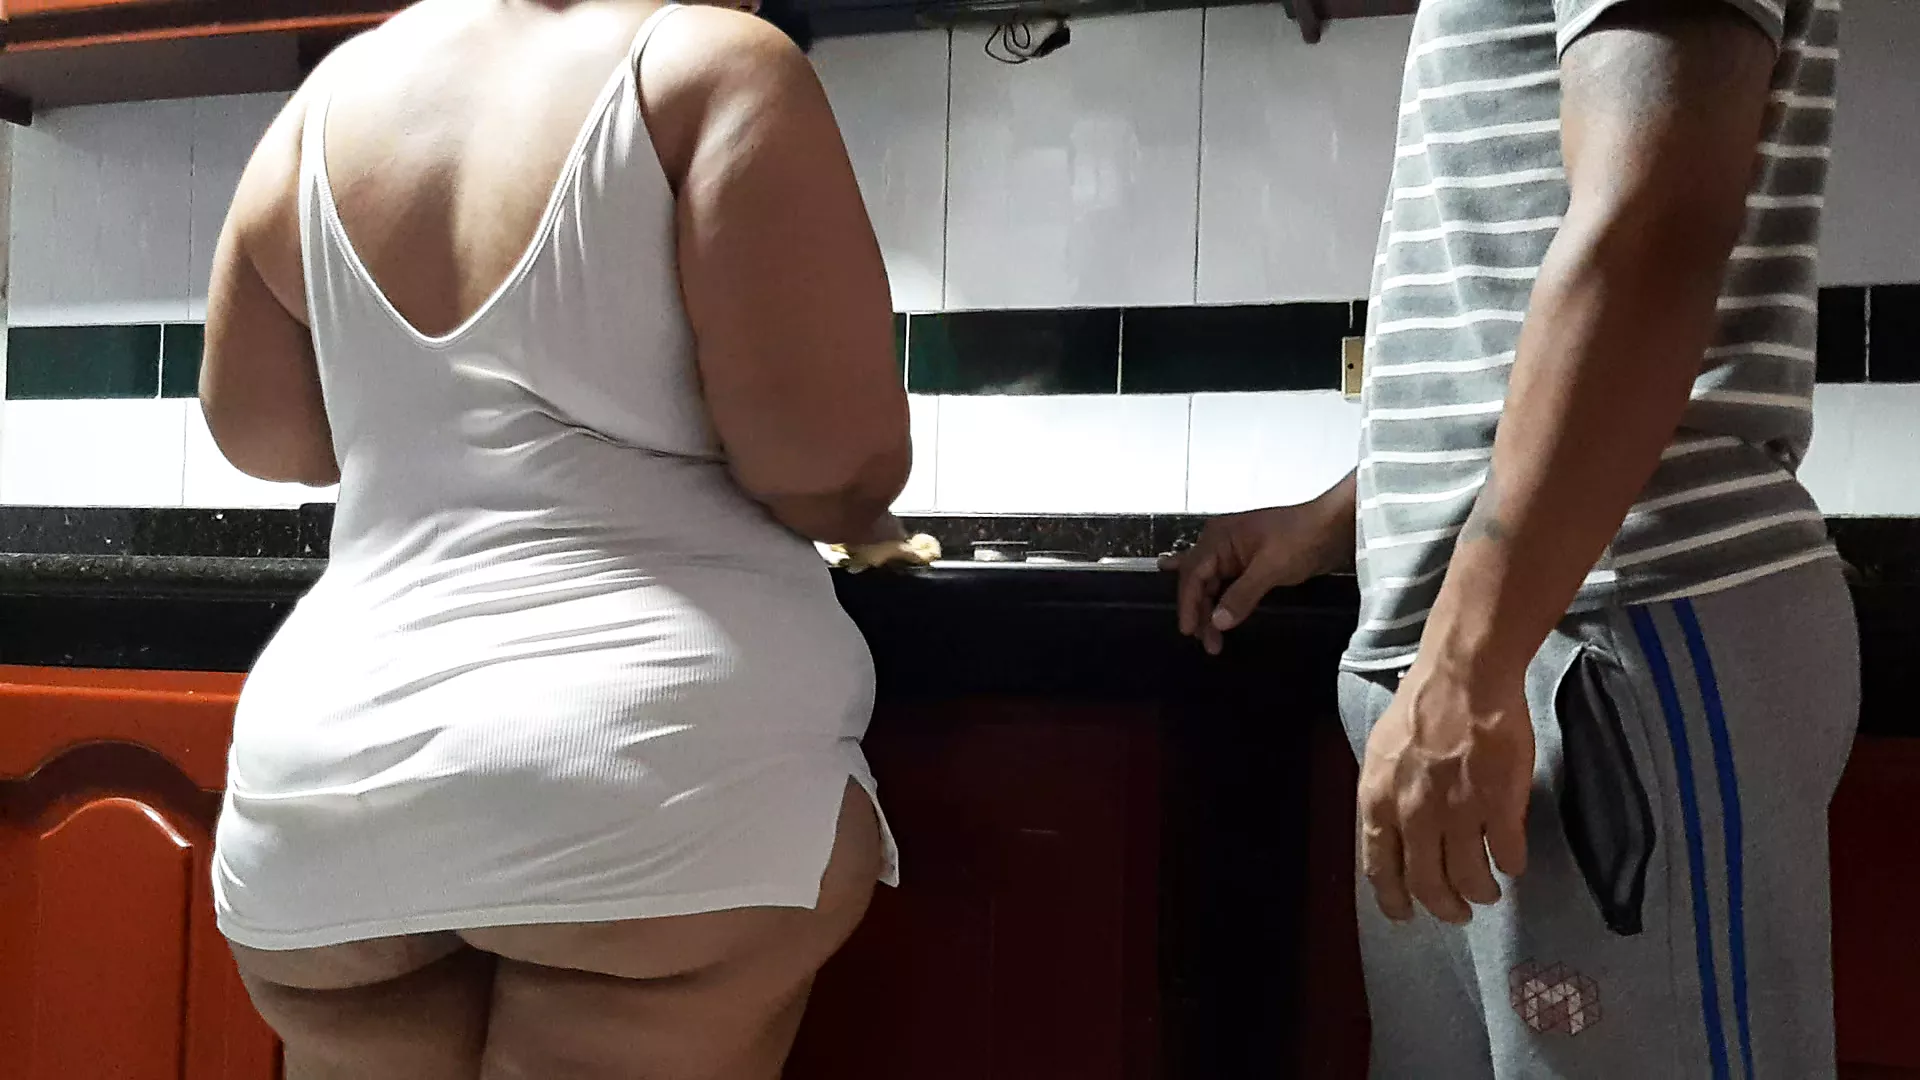 Sex With Sleeping Friend Mom - I Found My Best Friend's Mom Pantyless in the Kitchen | xHamster